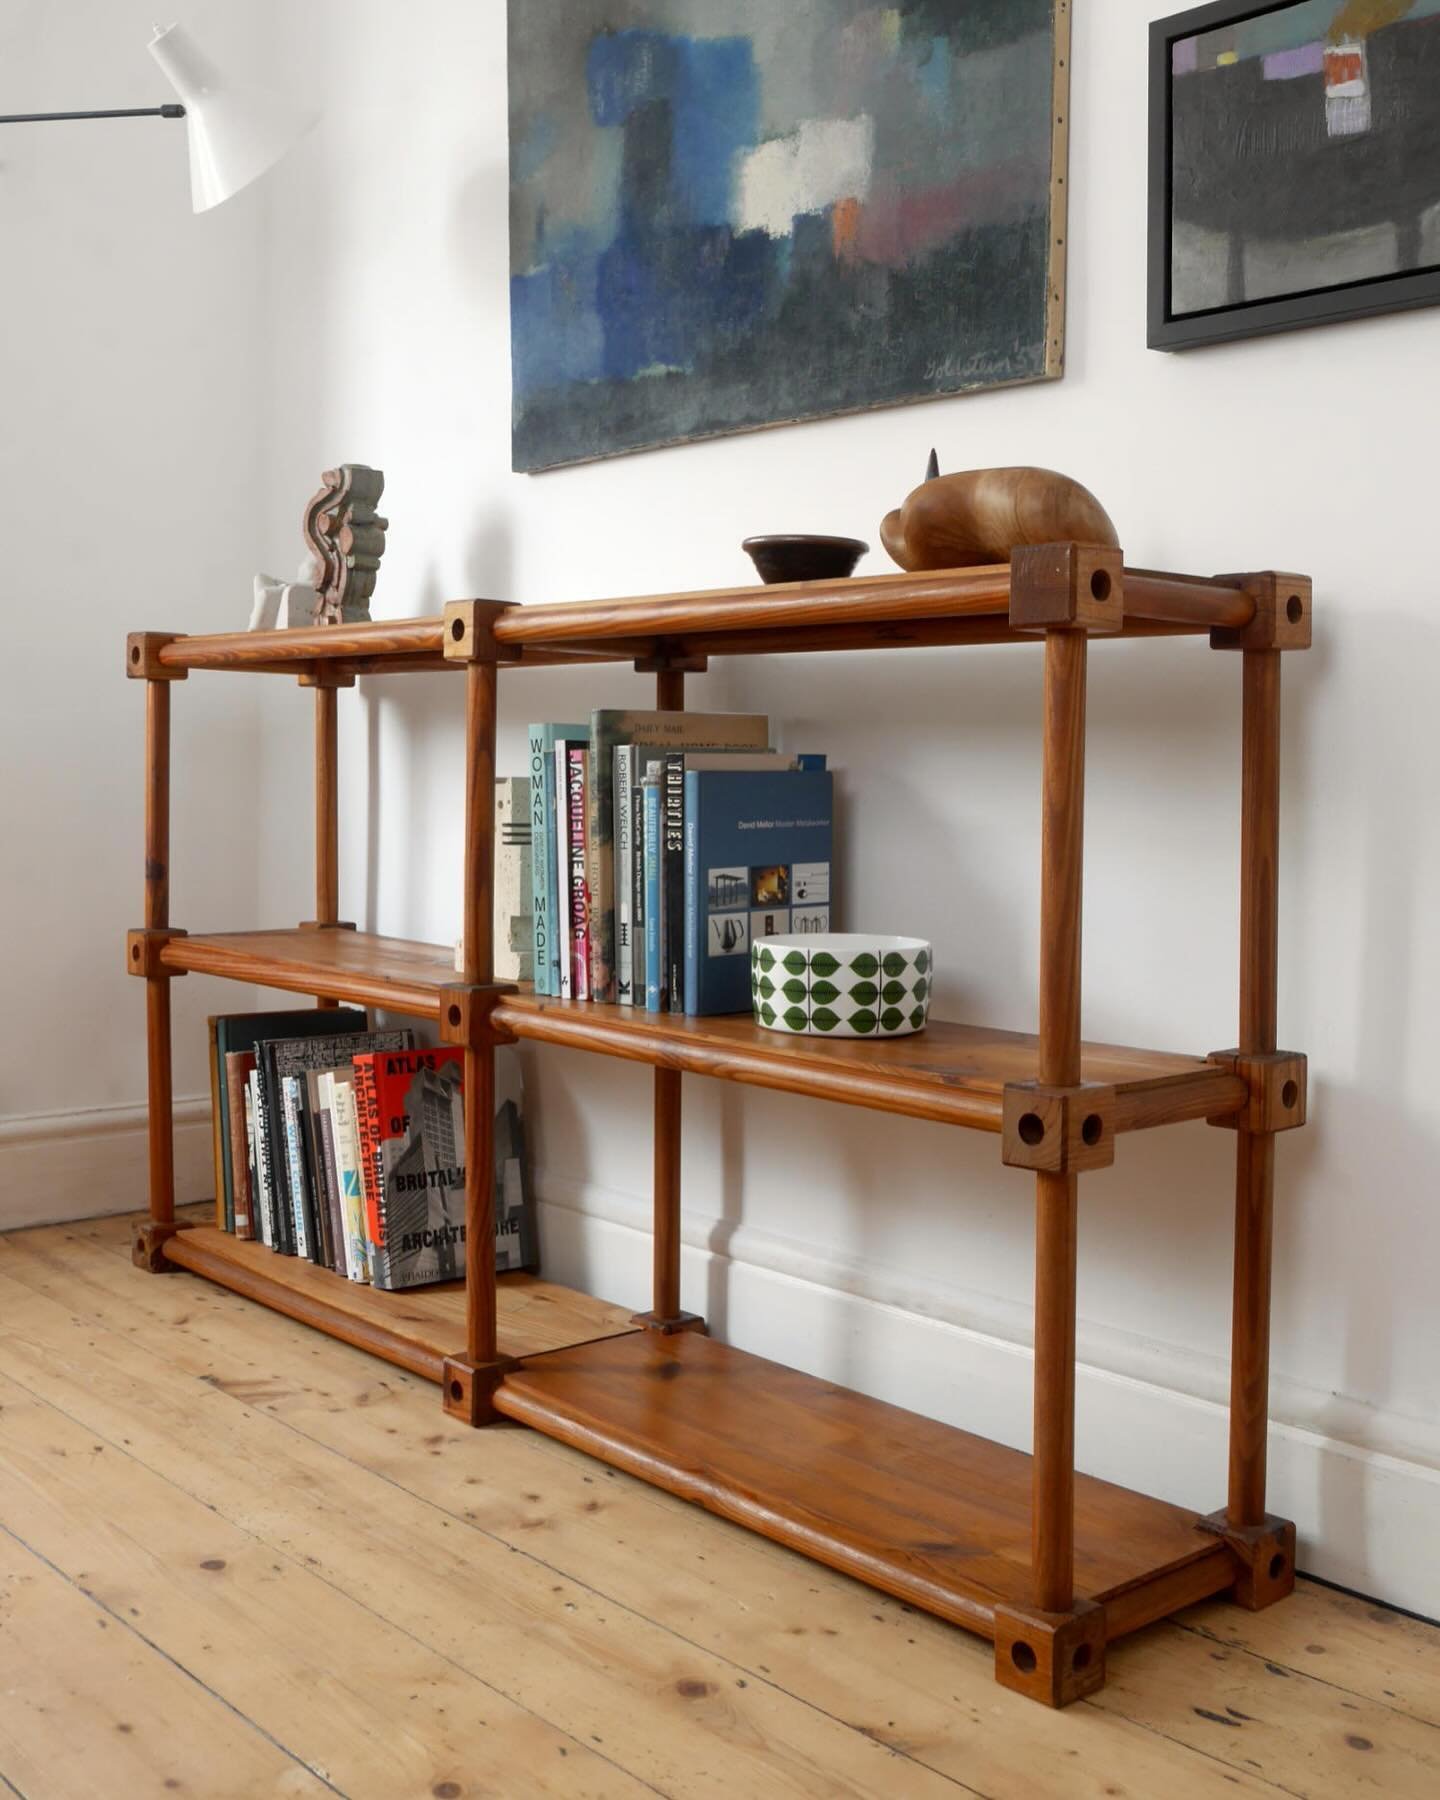 New stock just added to website, including this 1970s pine bookcase. Made of wooden rods, connecting blocks and shelving panels.